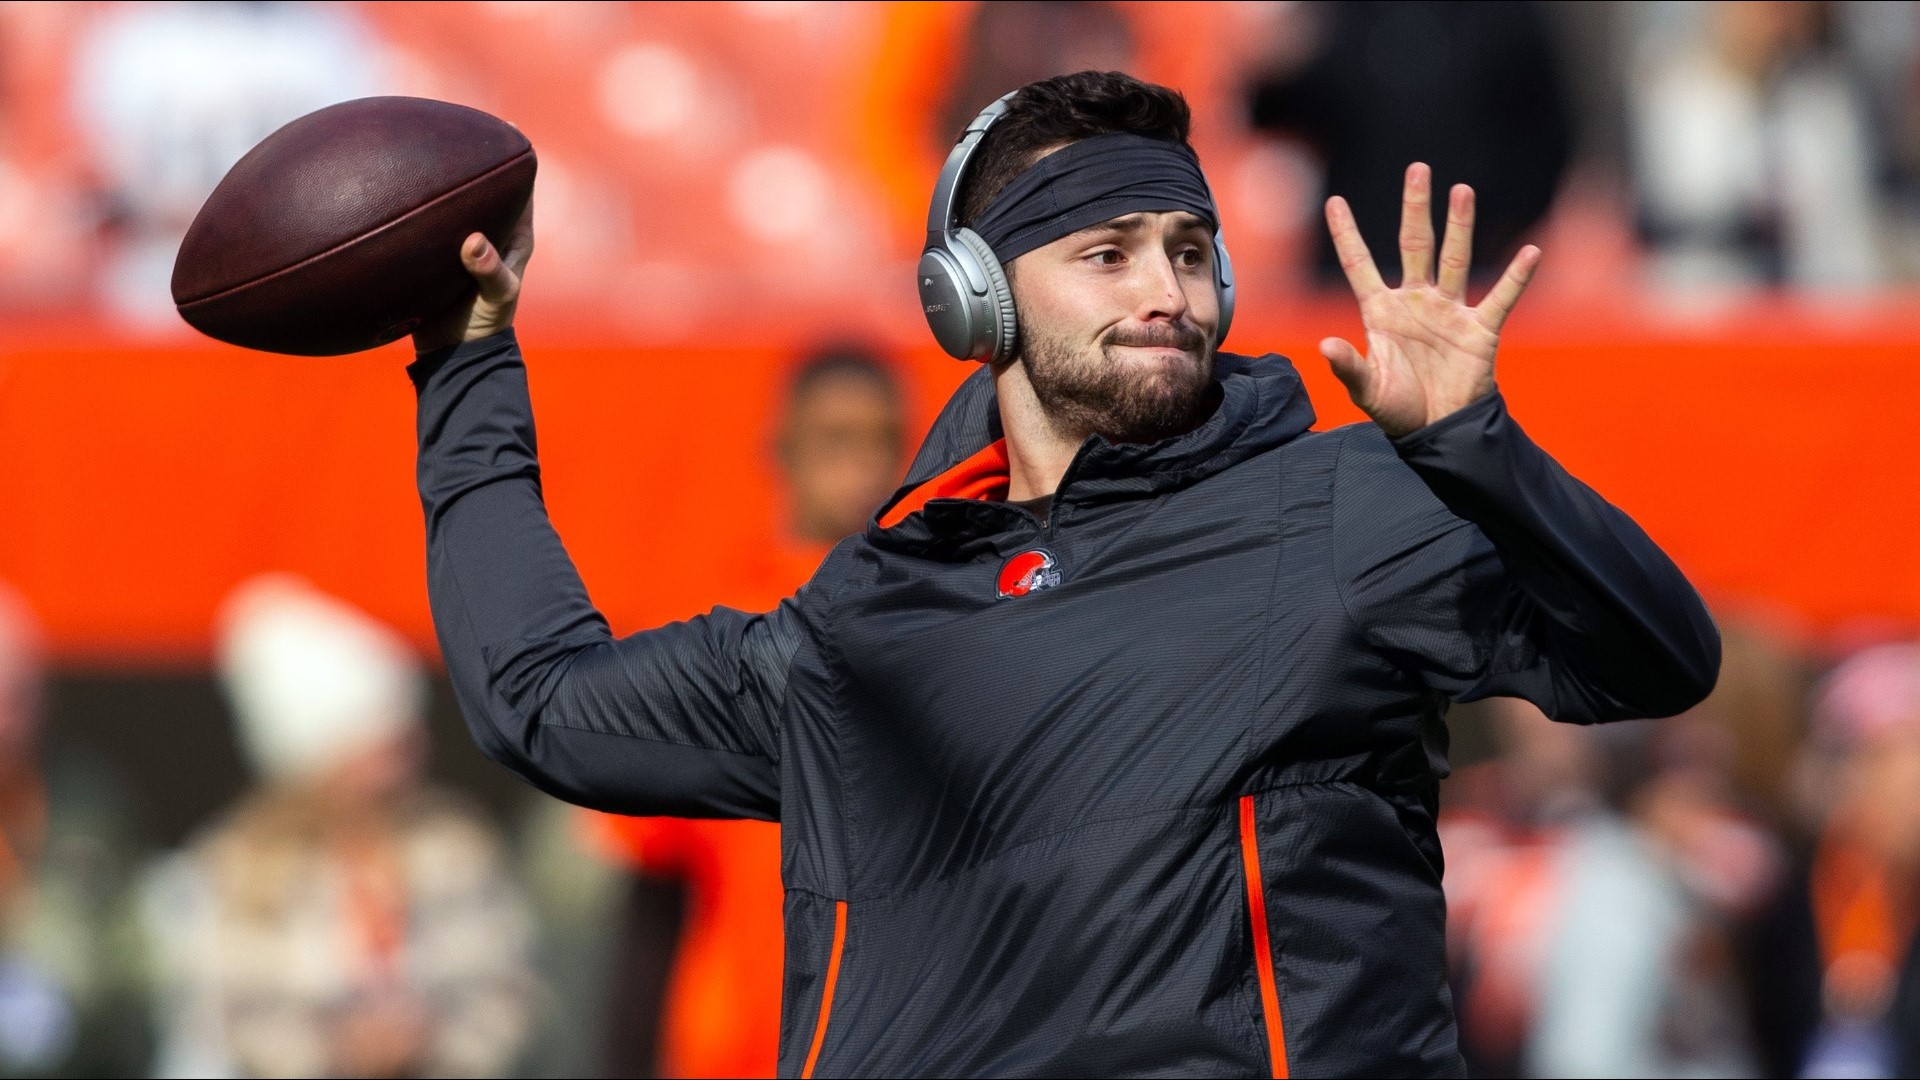 Cleveland Browns QB Baker Mayfield teams up with Barstool Sports to